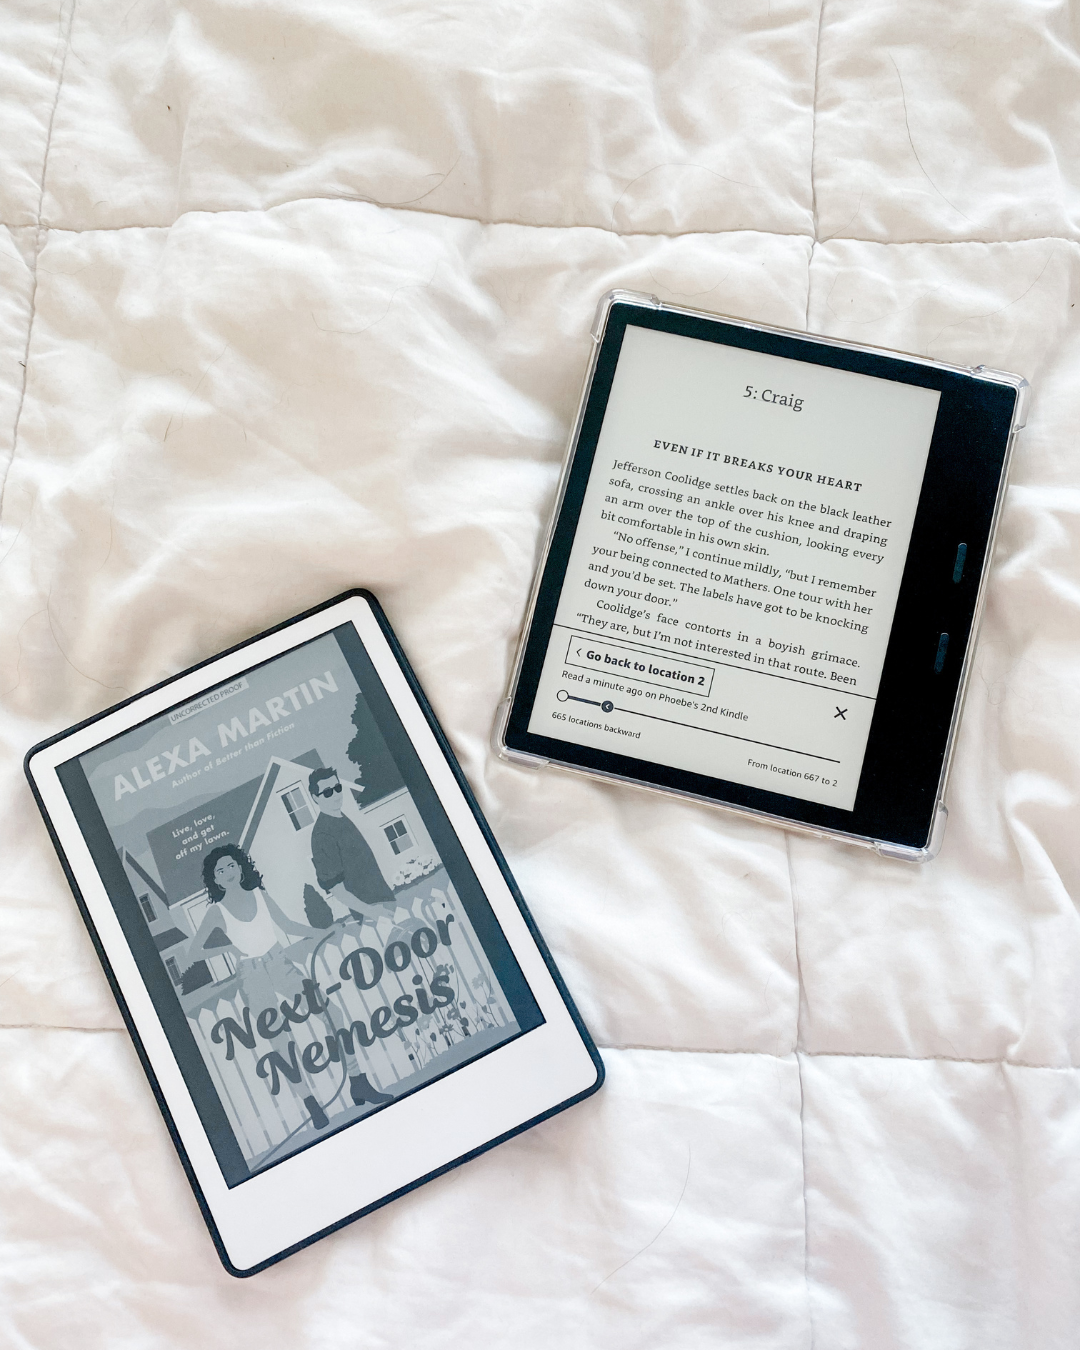 Which kindle should you buy in 2023? basic, paperwhite, oasis or scribe? 📖  